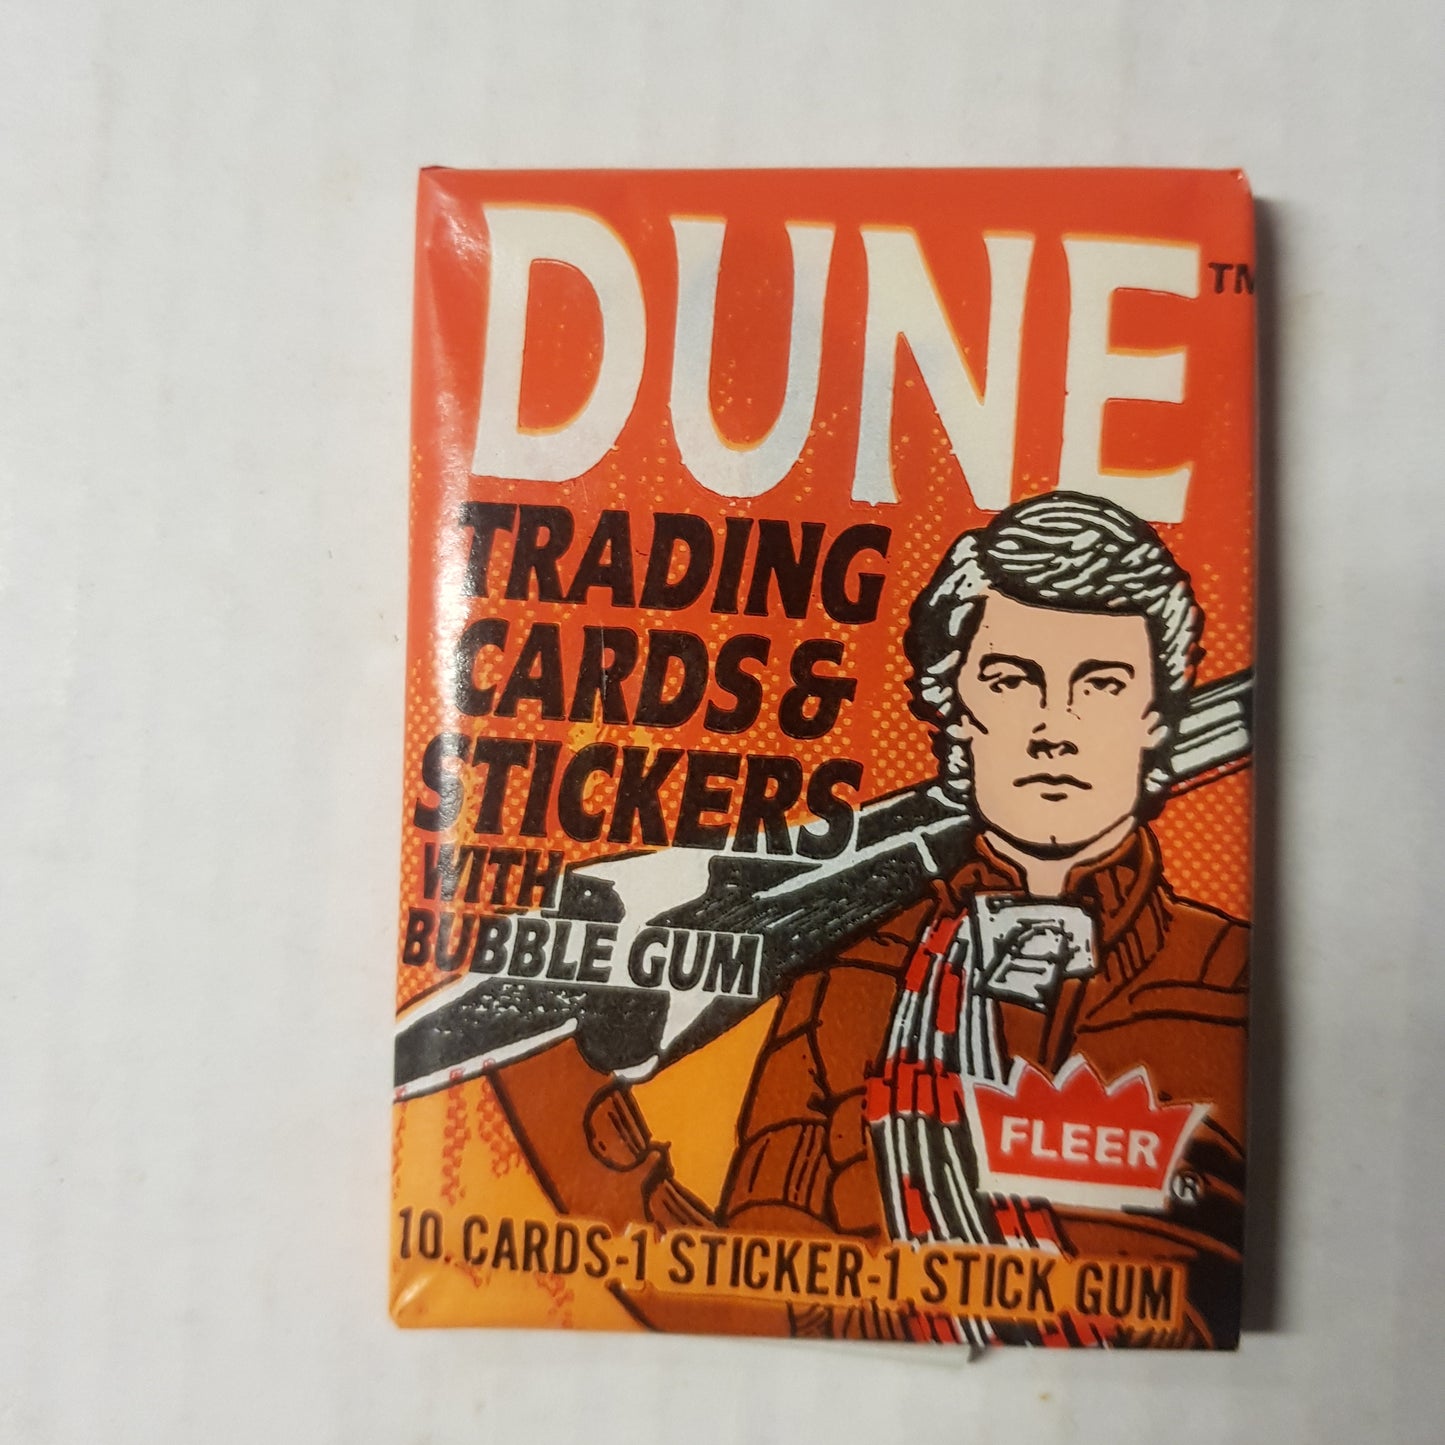 Dune Trading Cards & Stickers with Bubble Gum (1984)